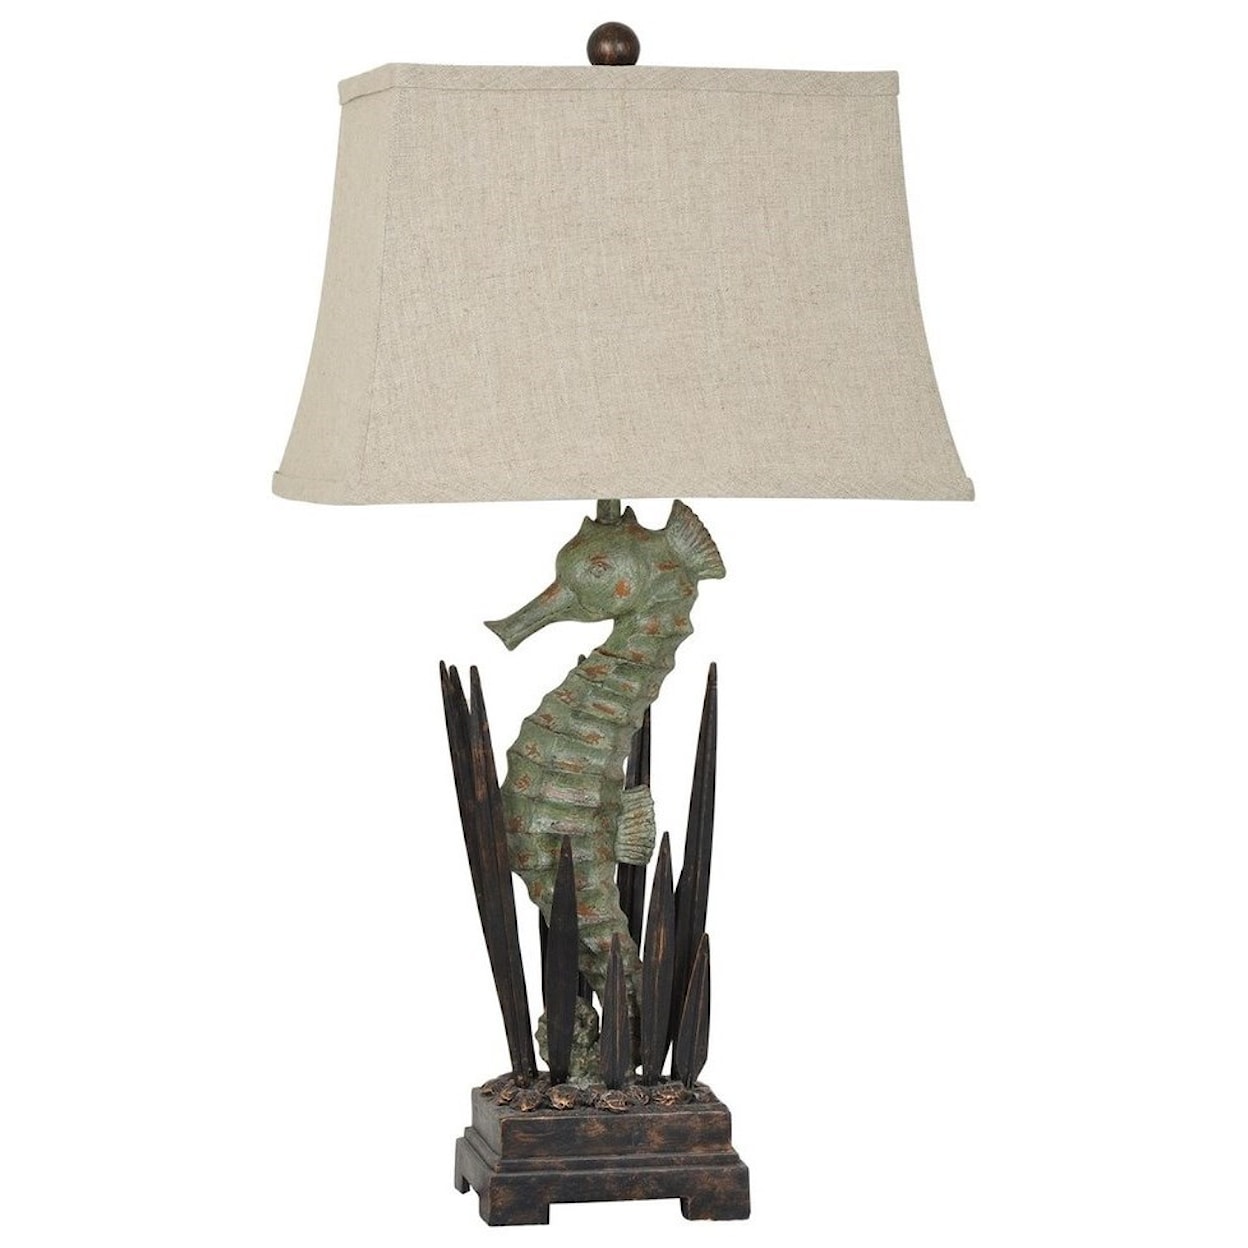 Crestview Collection Lighting Seahorse Table Lamp